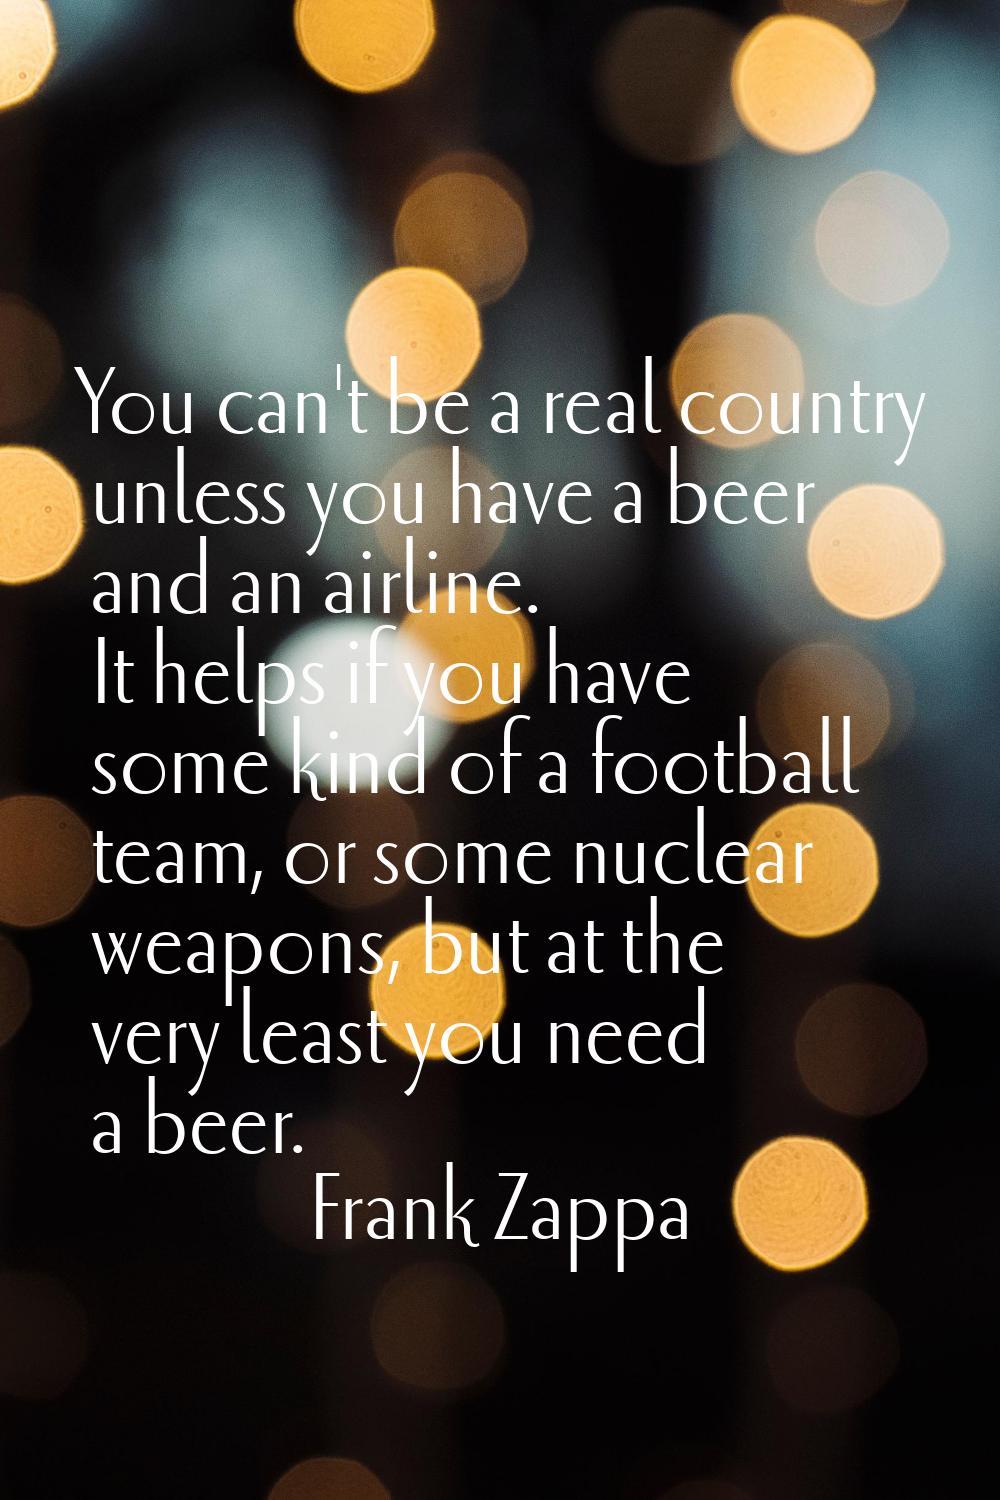 You can't be a real country unless you have a beer and an airline. It helps if you have some kind o